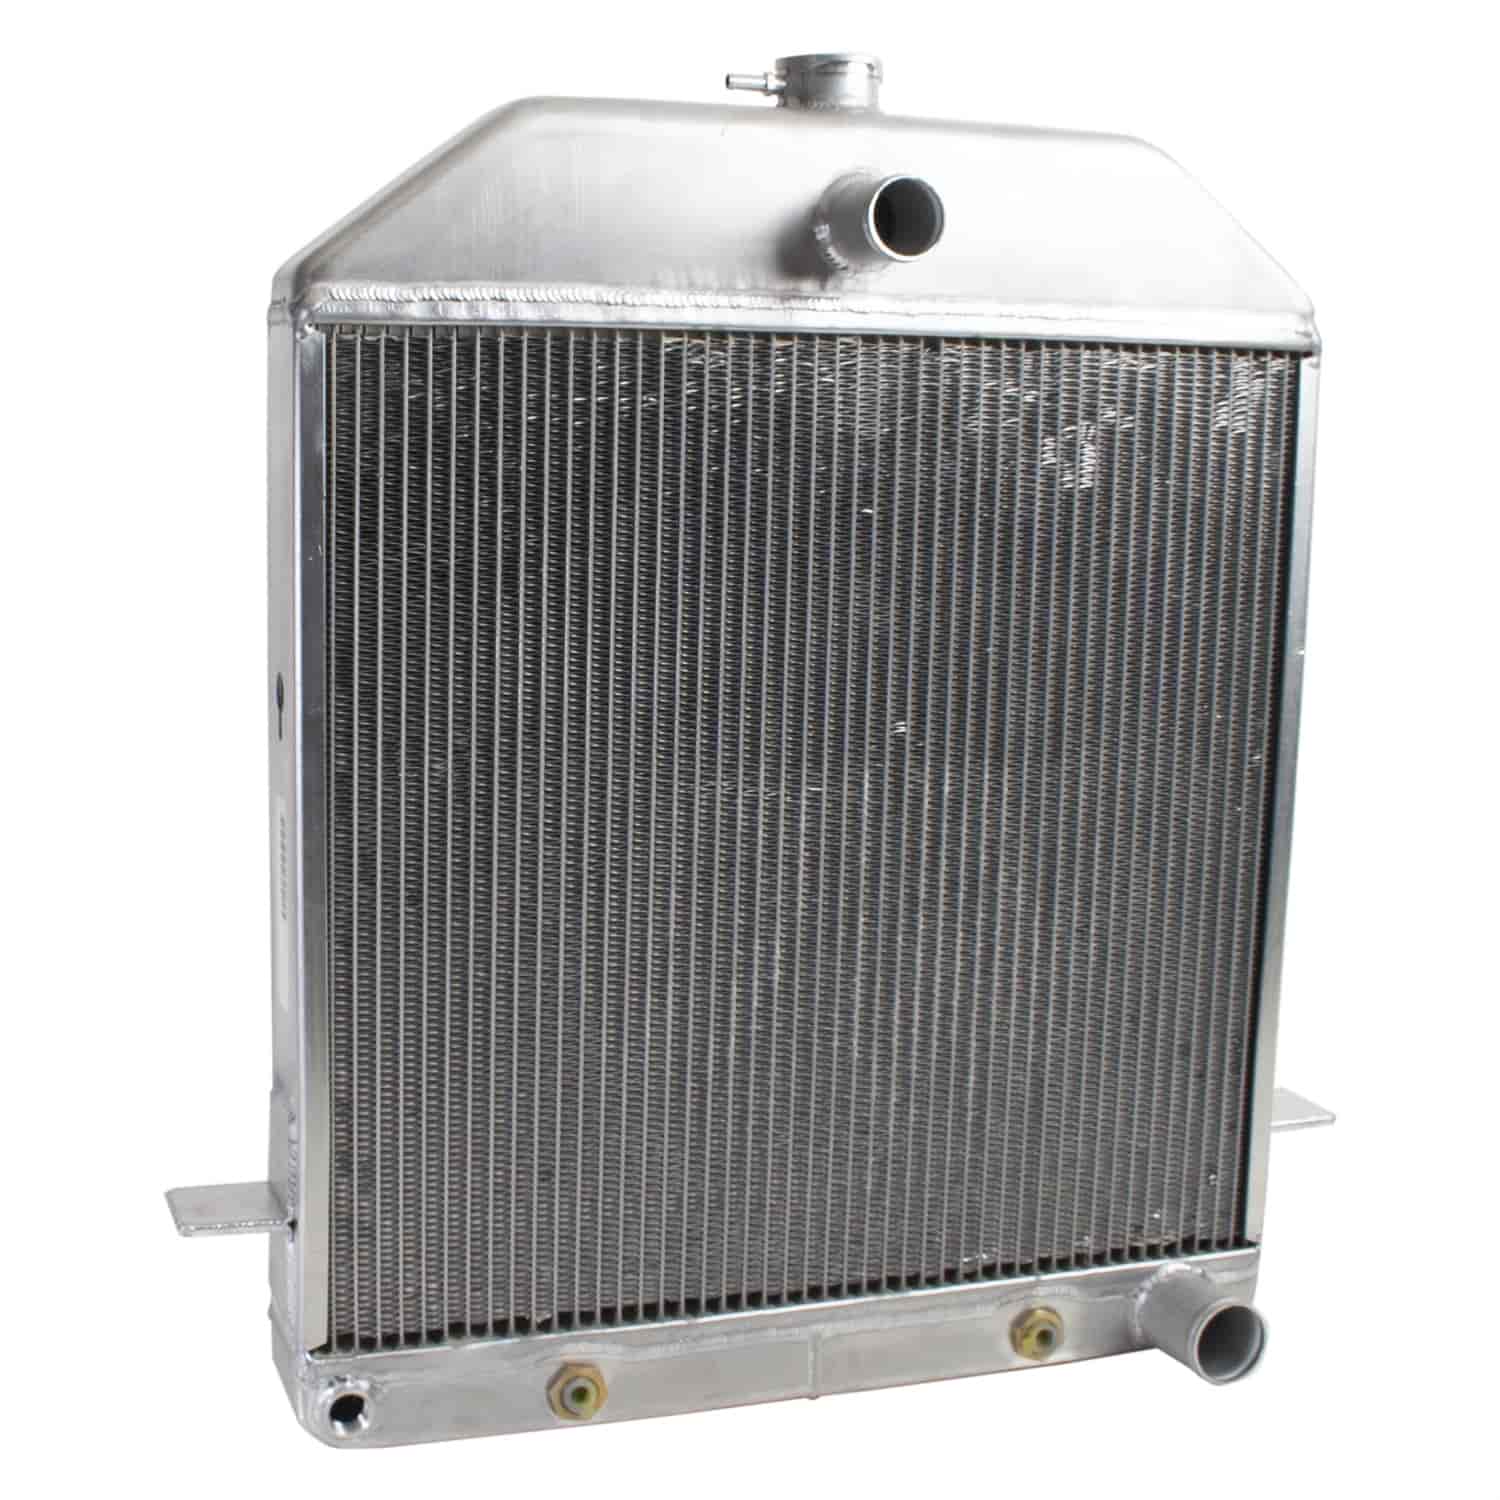 ExactFit Radiator for 1939-1940 Ford Deluxe with Early